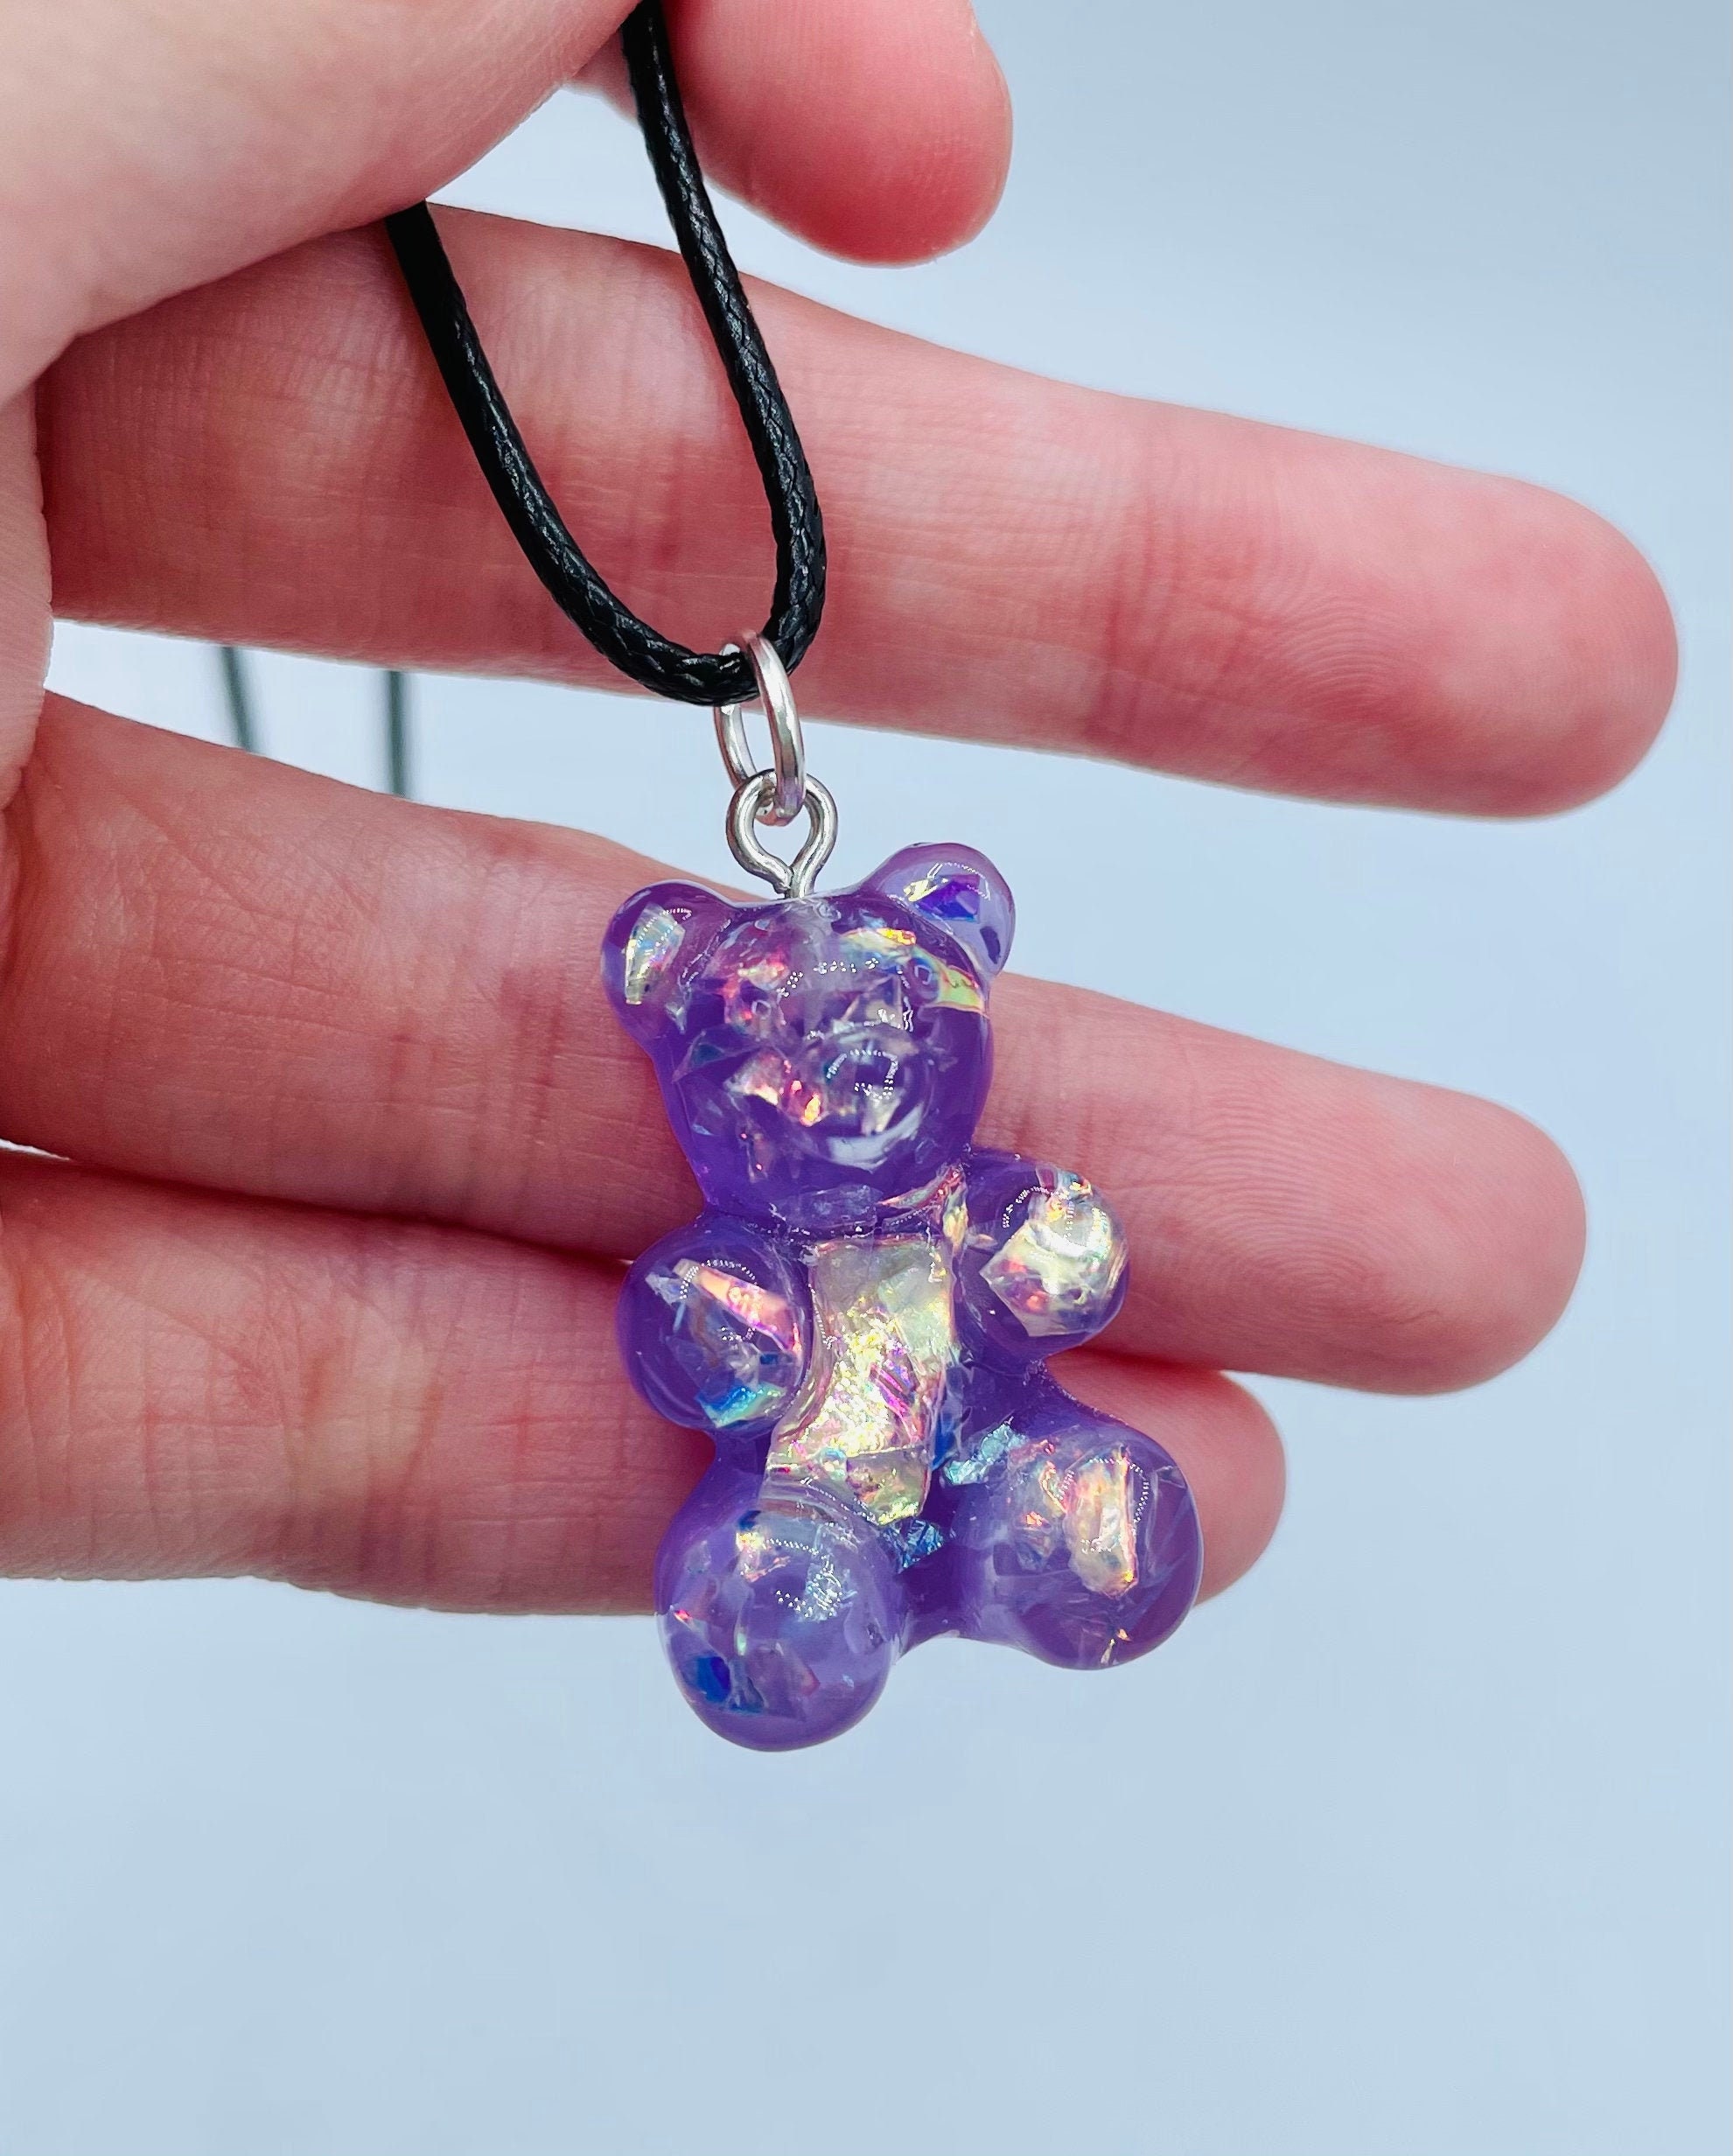 SASBSC Cute Candy Charms Resin Candy Jewelry Charm Lollipops Gummy Bear Charms for Jewelry Making Bracelet Keychain Necklace